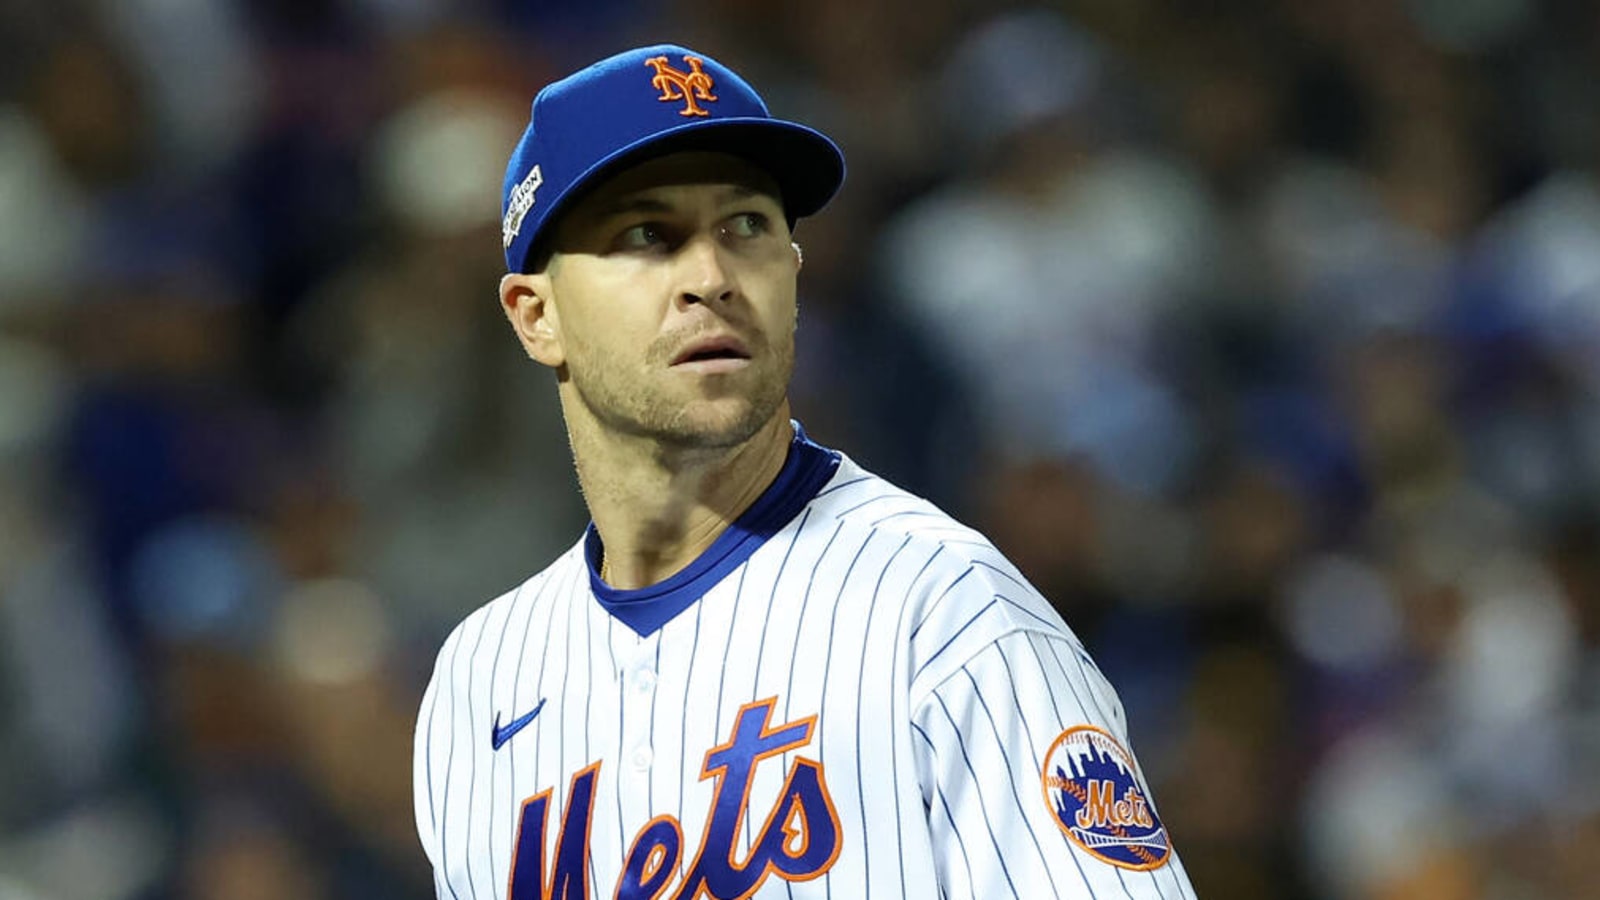 Jacob deGrom's injury confirms Mets made right call